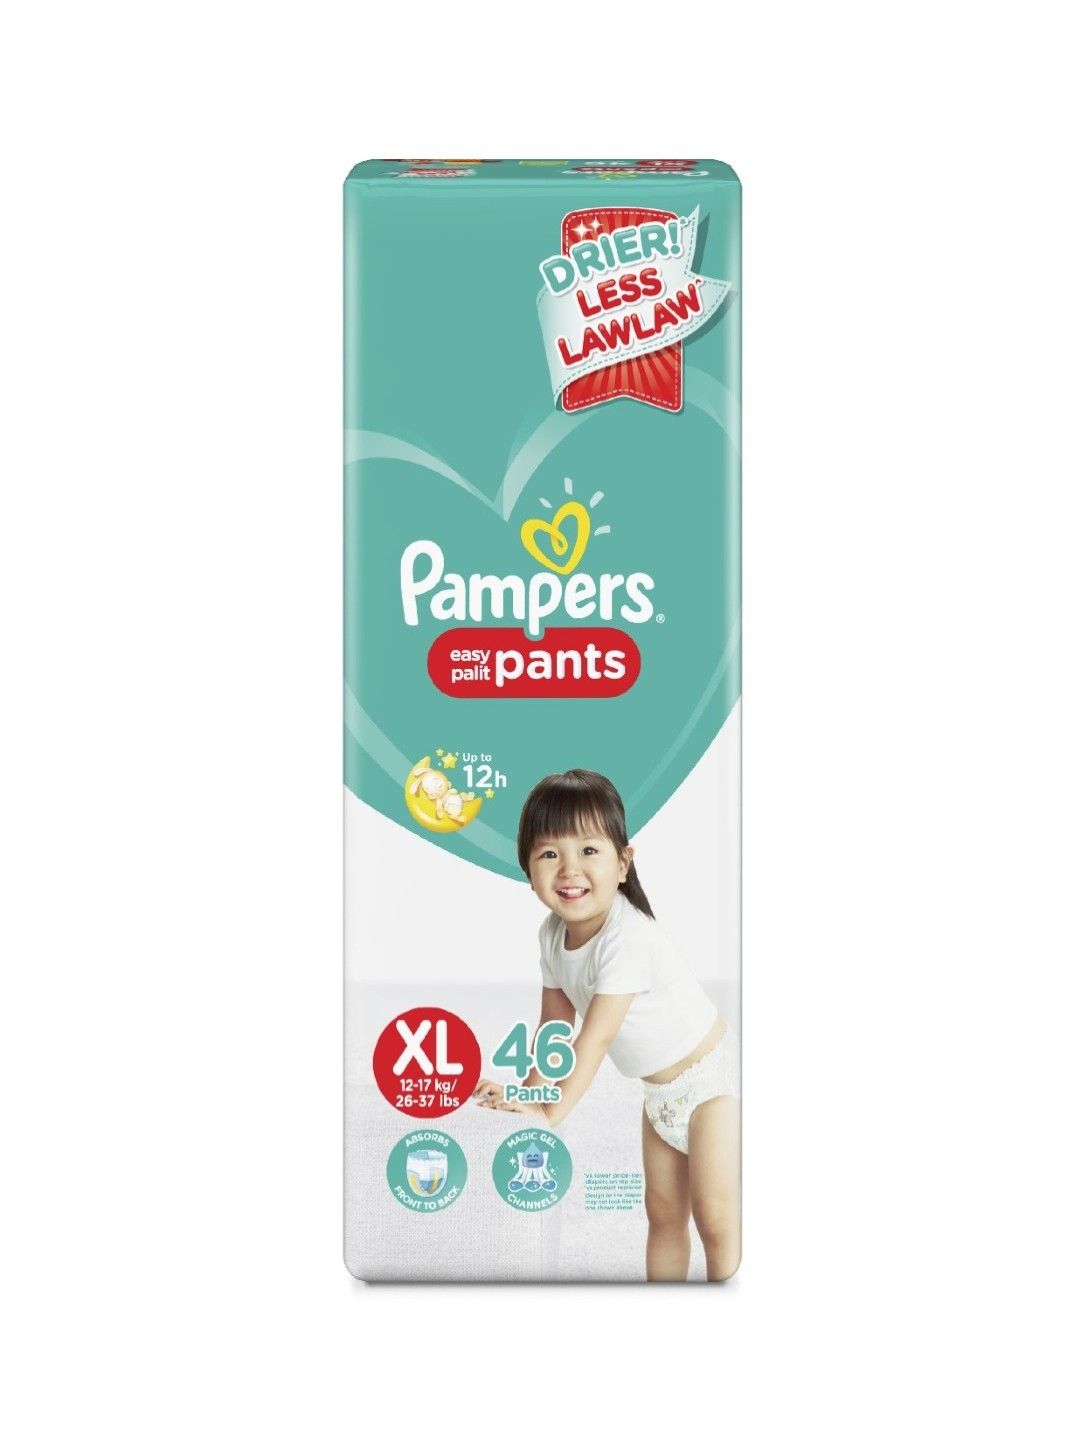 Pampers Baby Dry Pants XL 46s x 1 pack (46 pcs)